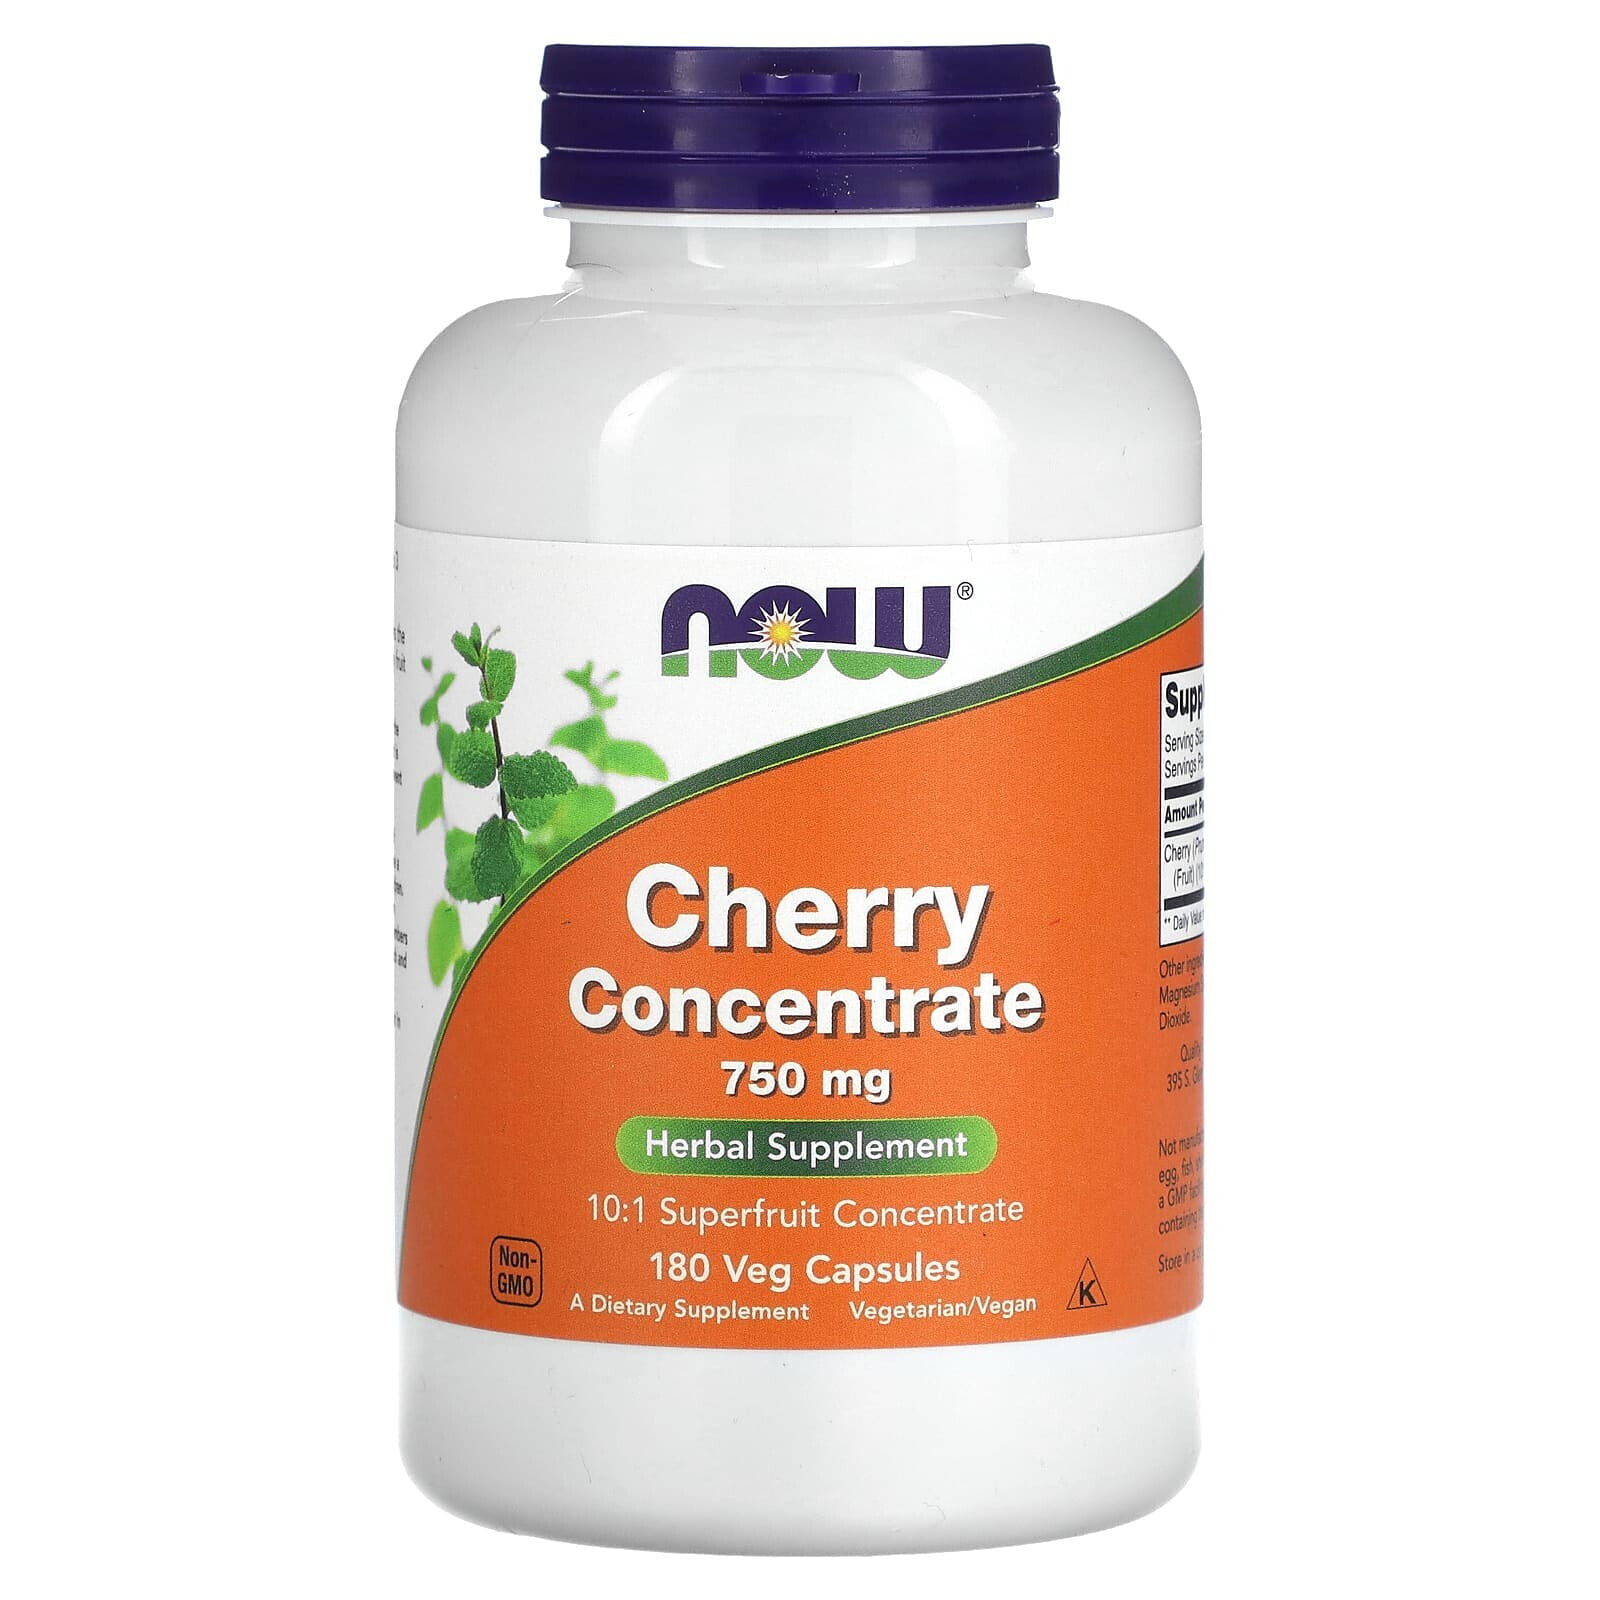 Антиоксидант NOW Cherry Concentrate -- 750 mg - 180 Veg Capsules